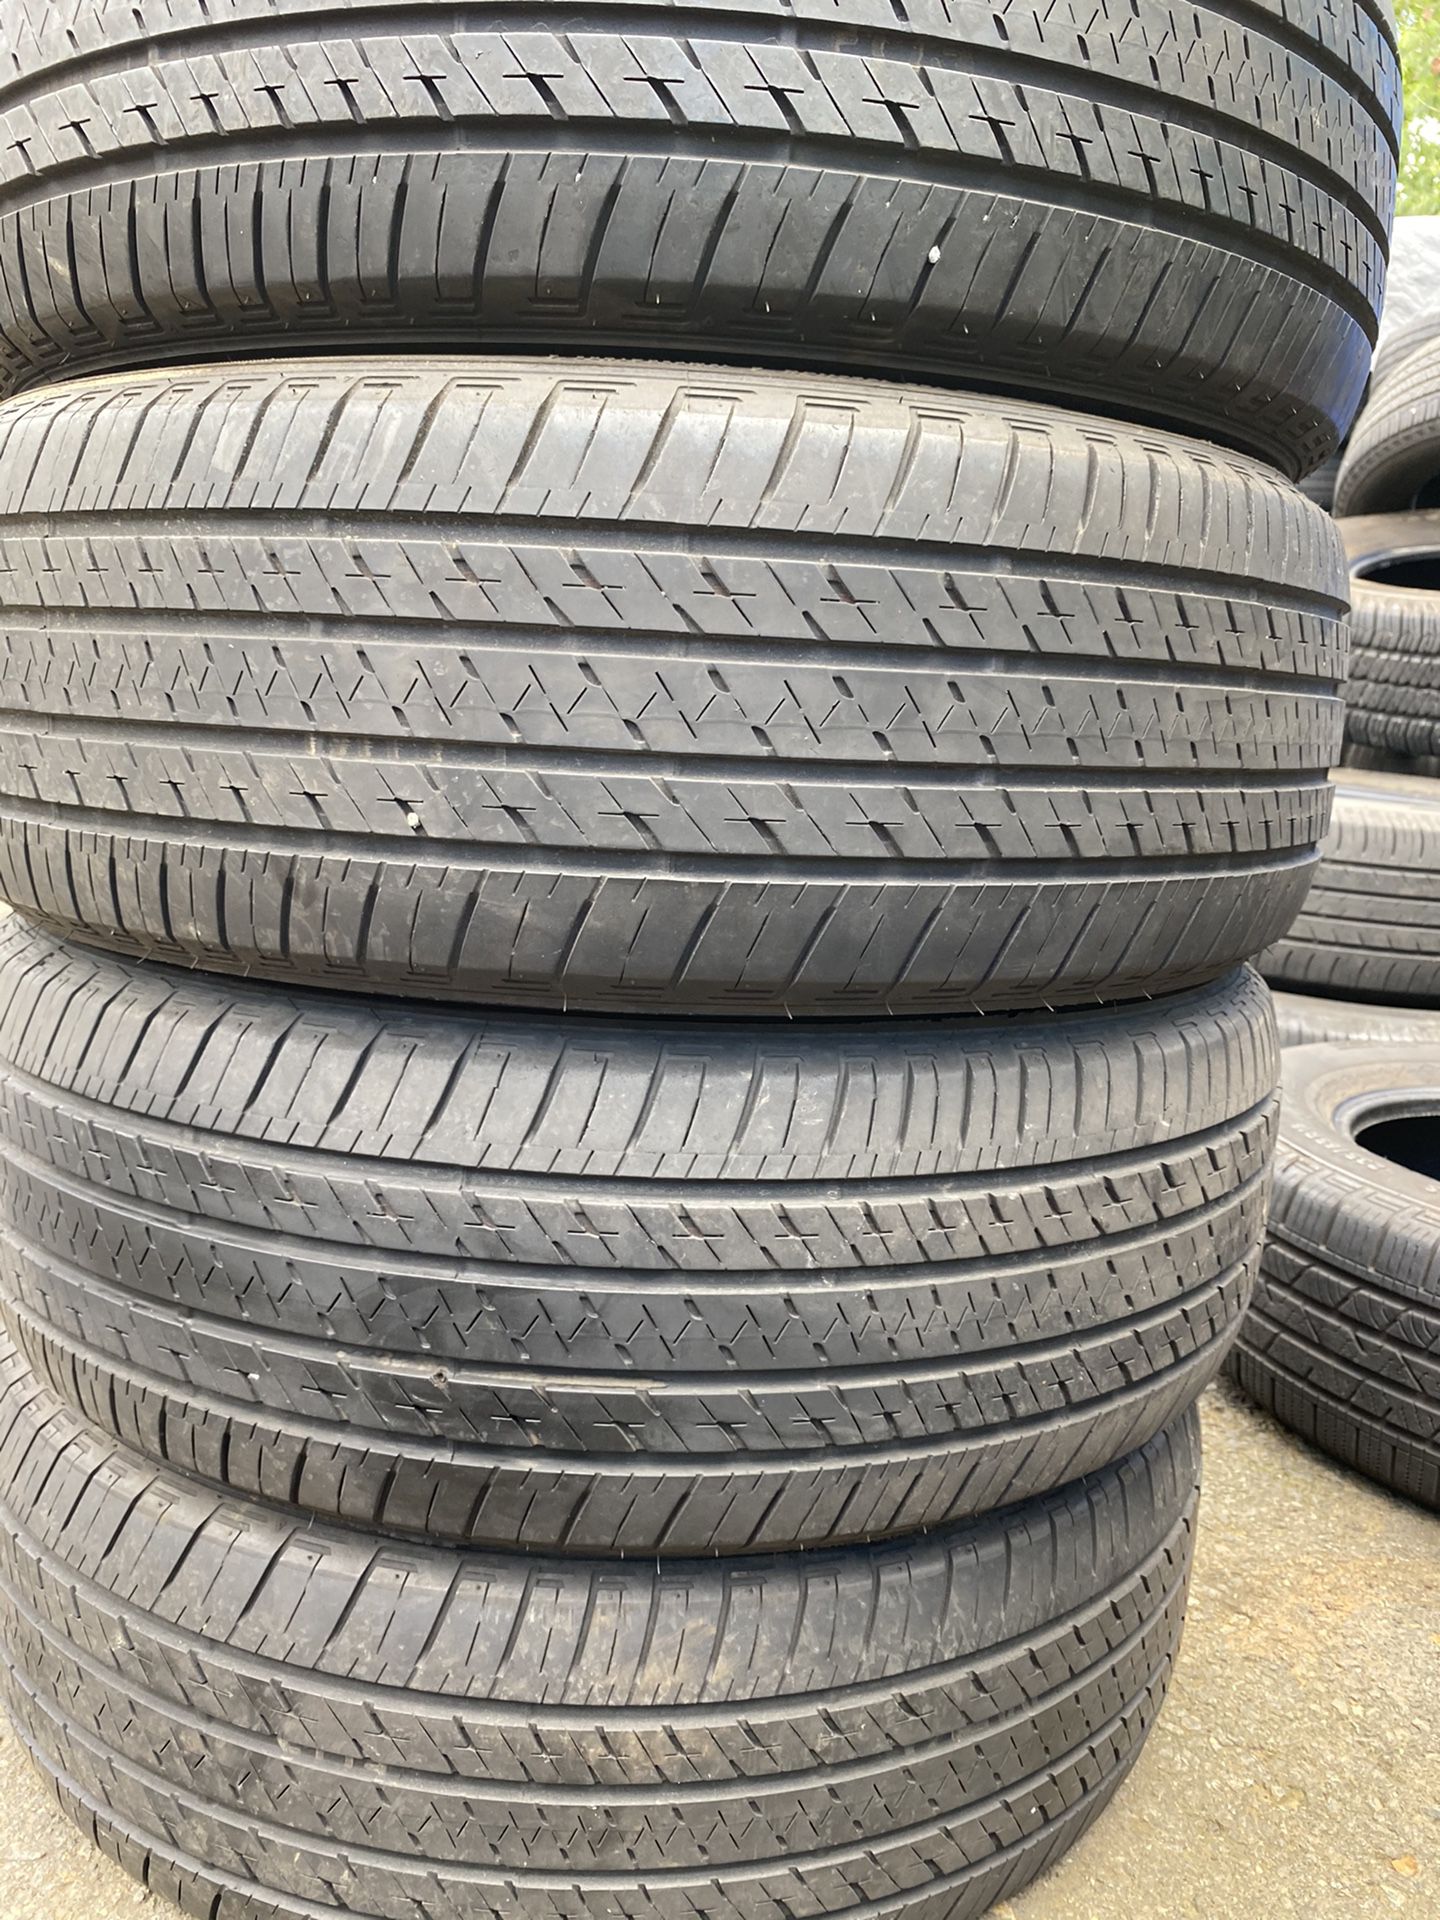 Set 4 usted tire 235/60R18 BRIDGESTONE one have patch set 4 used tire $200